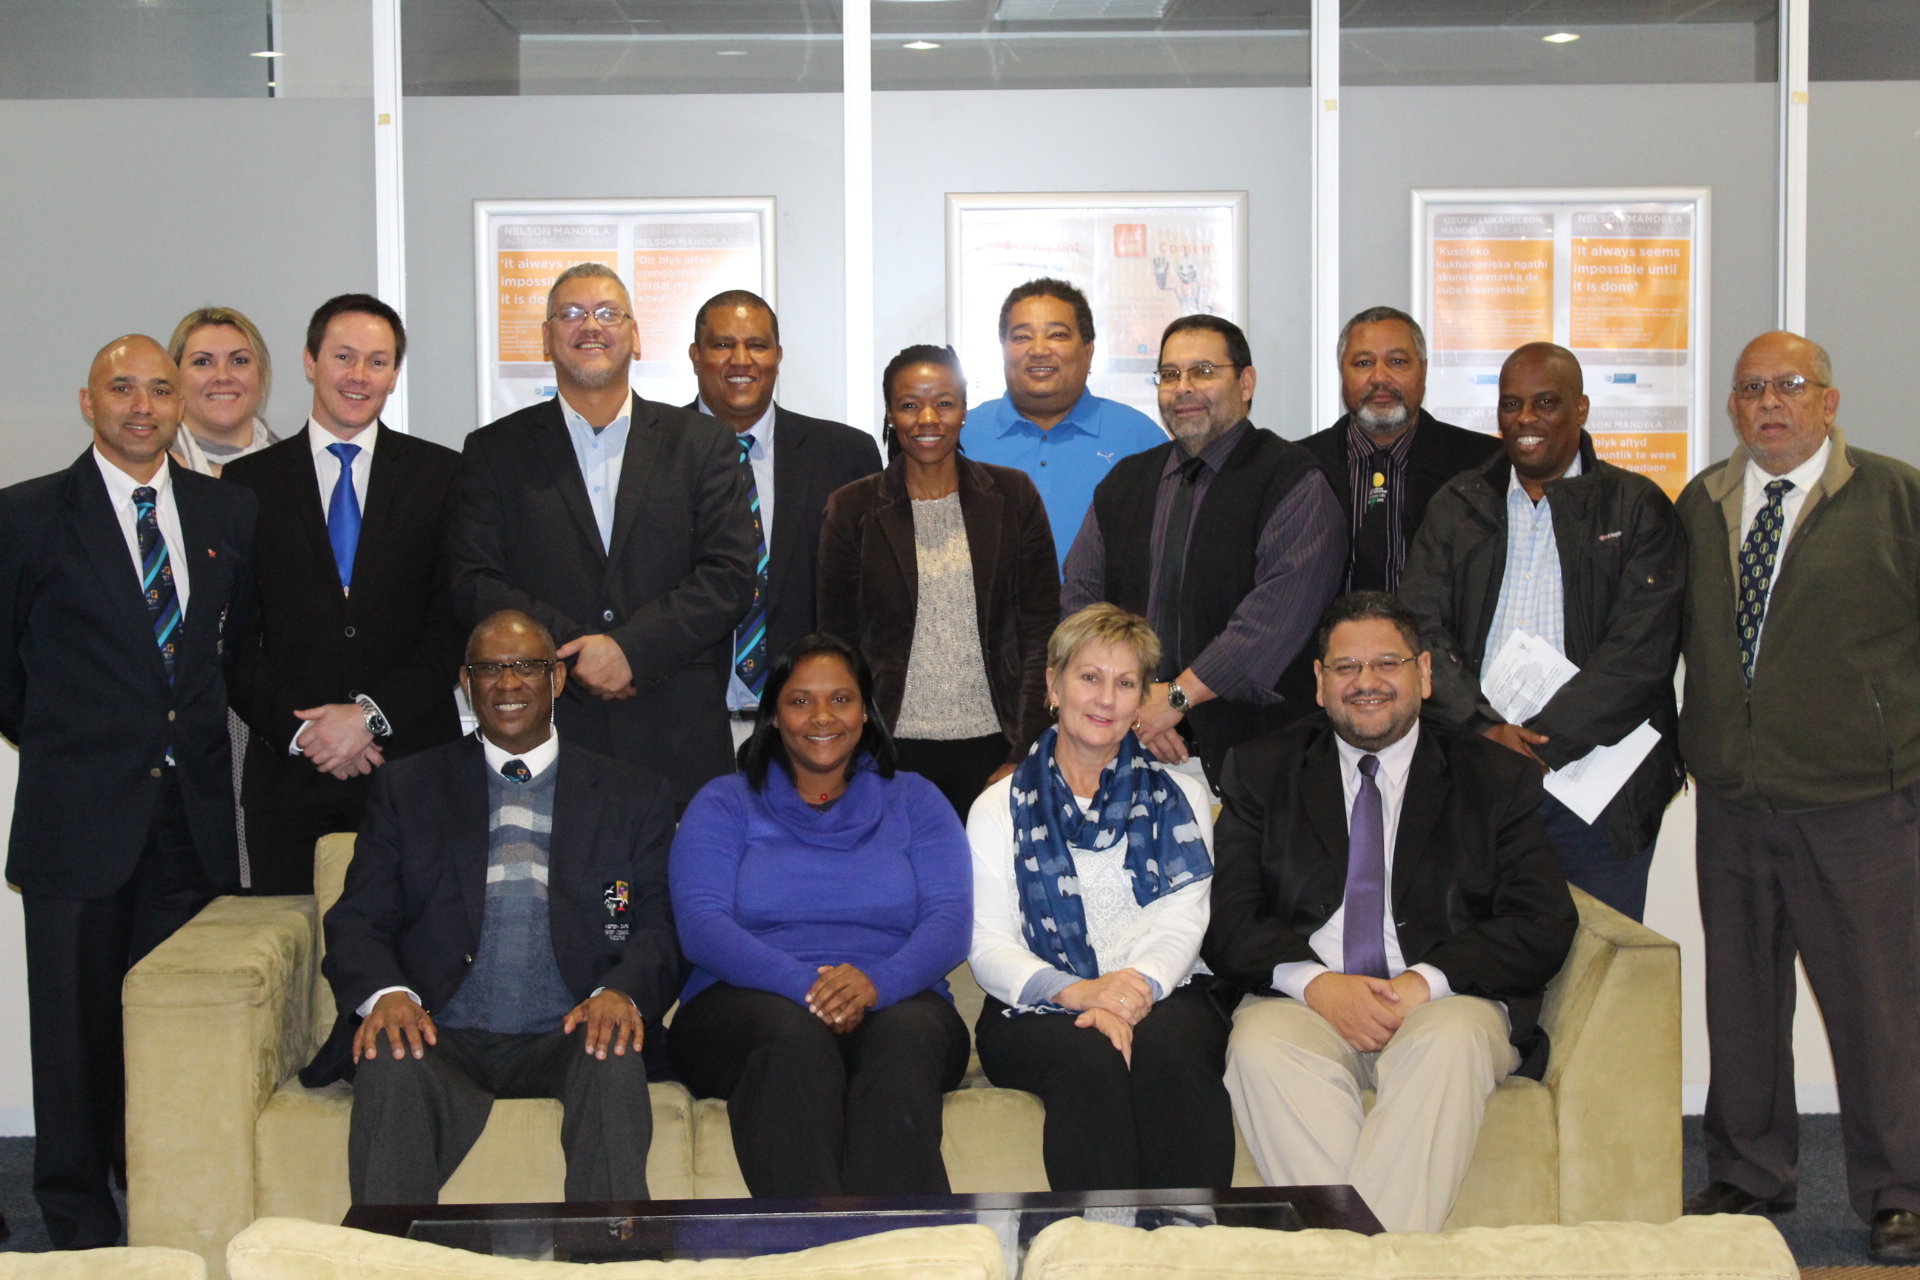 Minister Marais and HOD Brent Walters with members of the Western Cape sport confederation